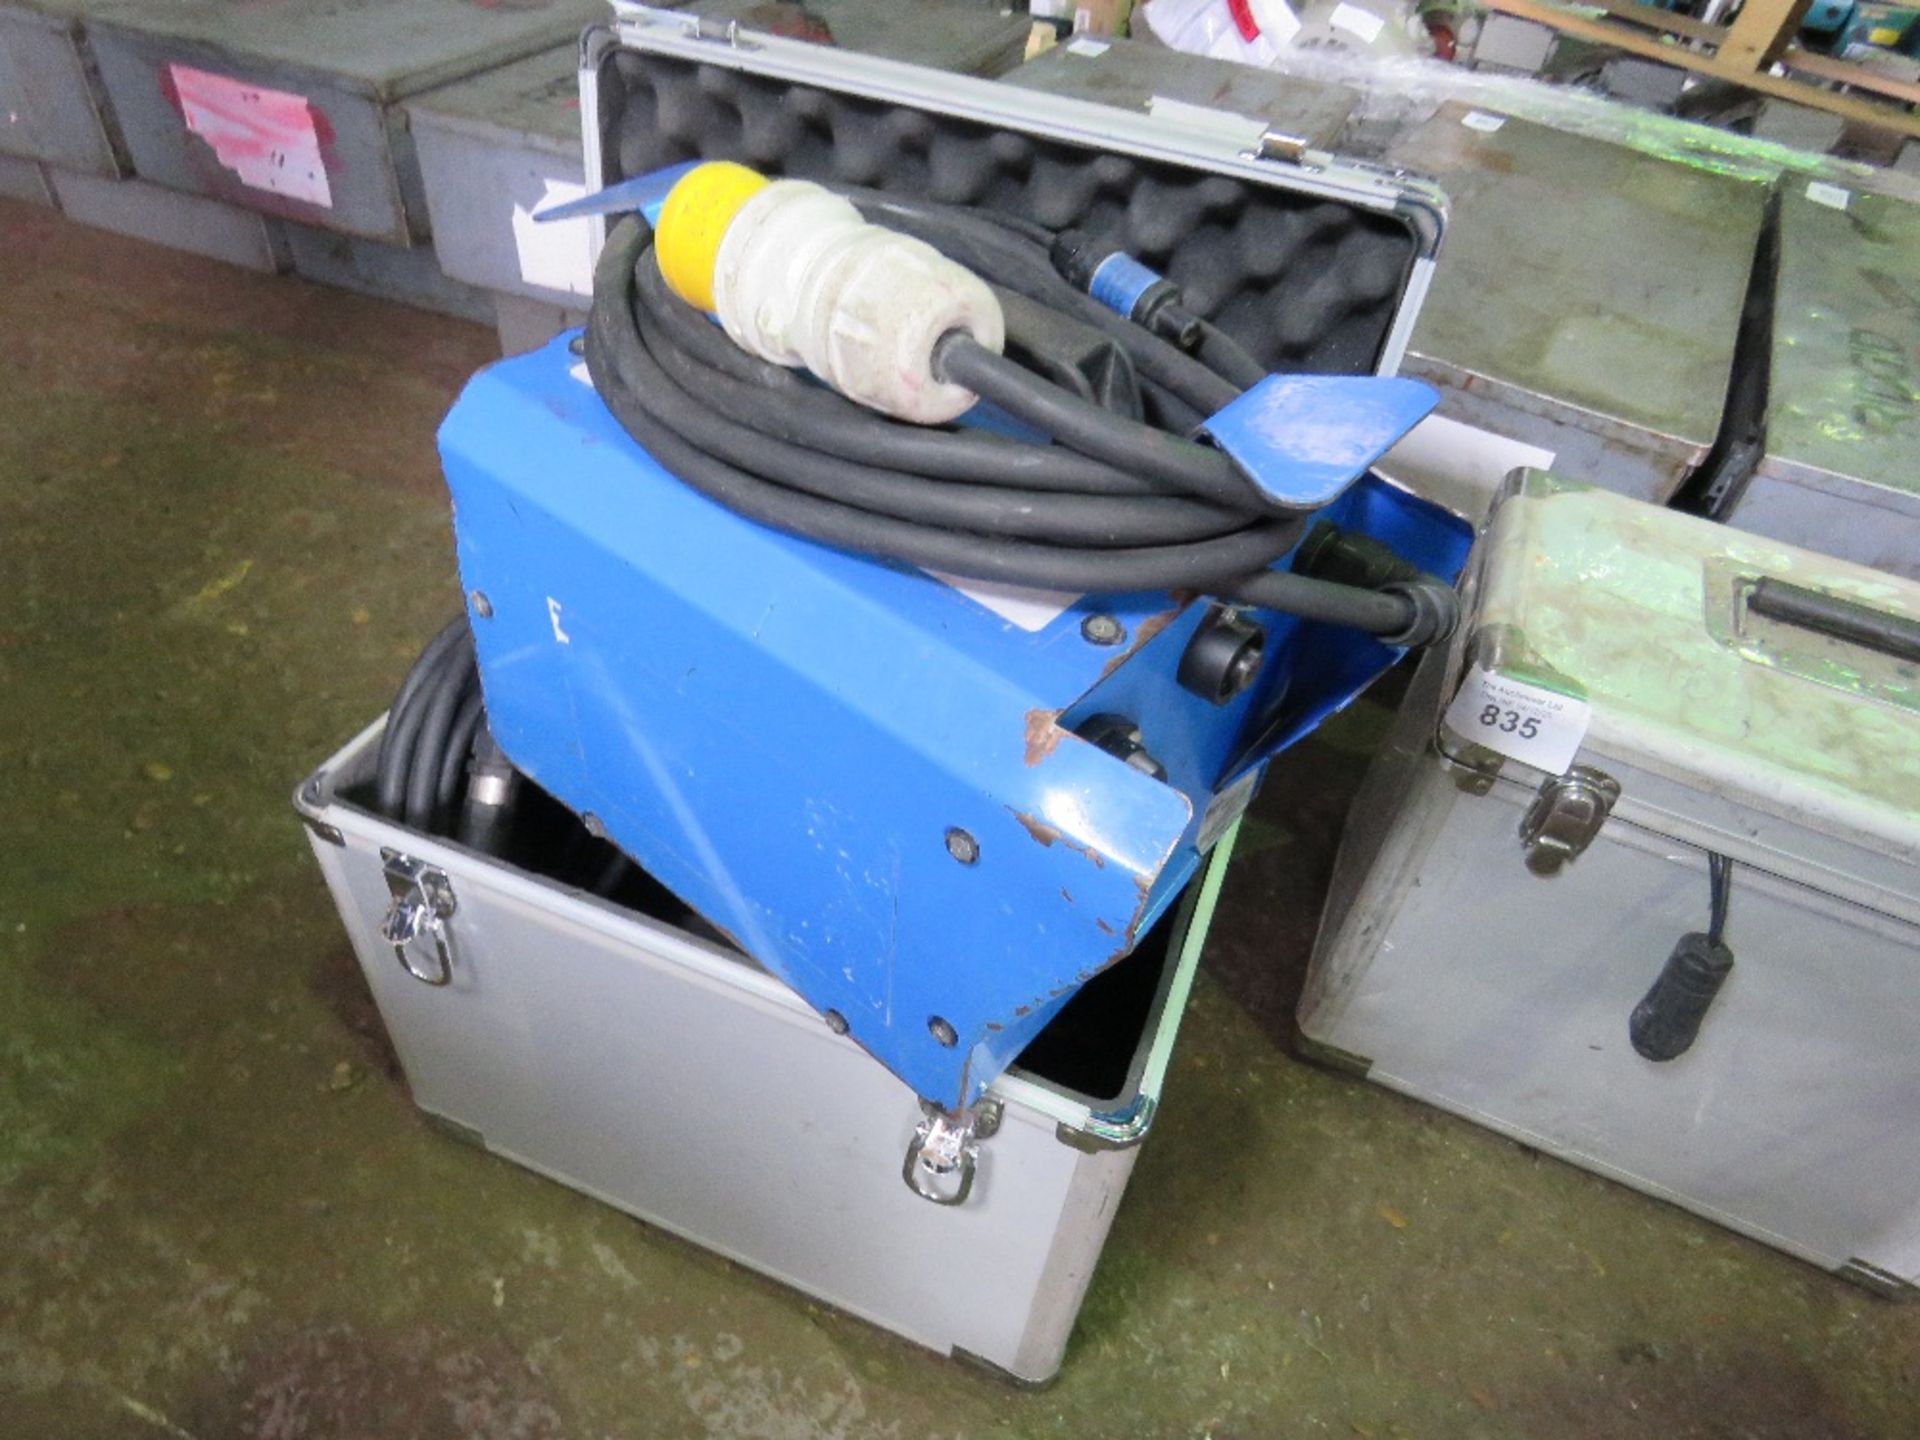 1 X UNIVERSAL S-315 110VOLT 2470W DRAINAGE PIPE FUSION WELDER UNIT. IN CASE WITH CABLES ETC.